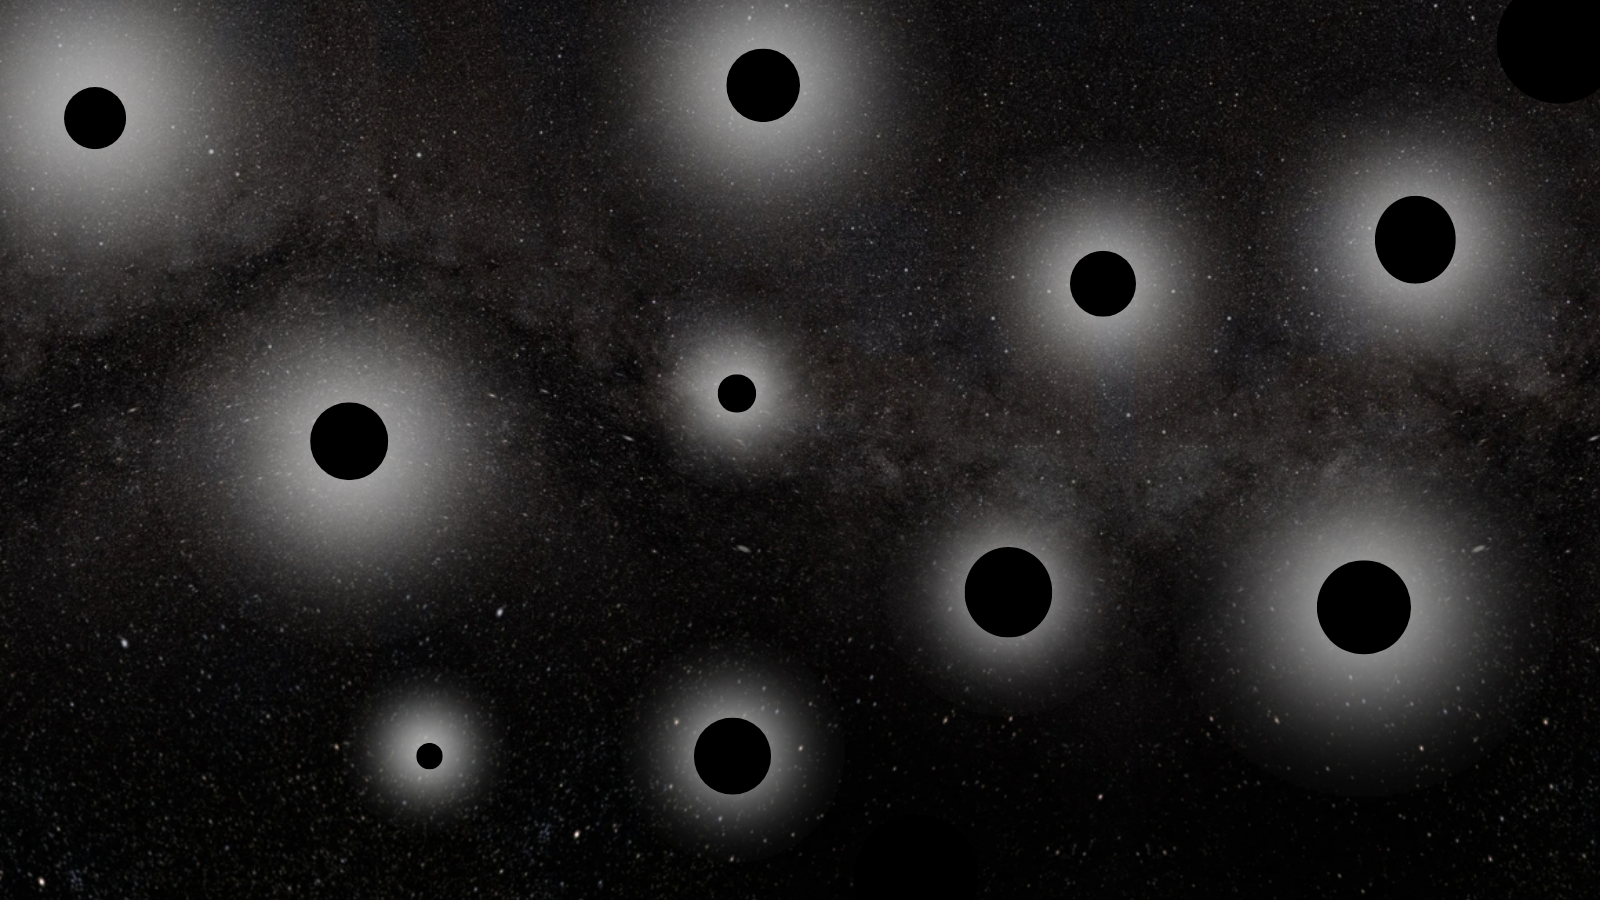 If the Big Bang created miniature black holes, where are they? Space